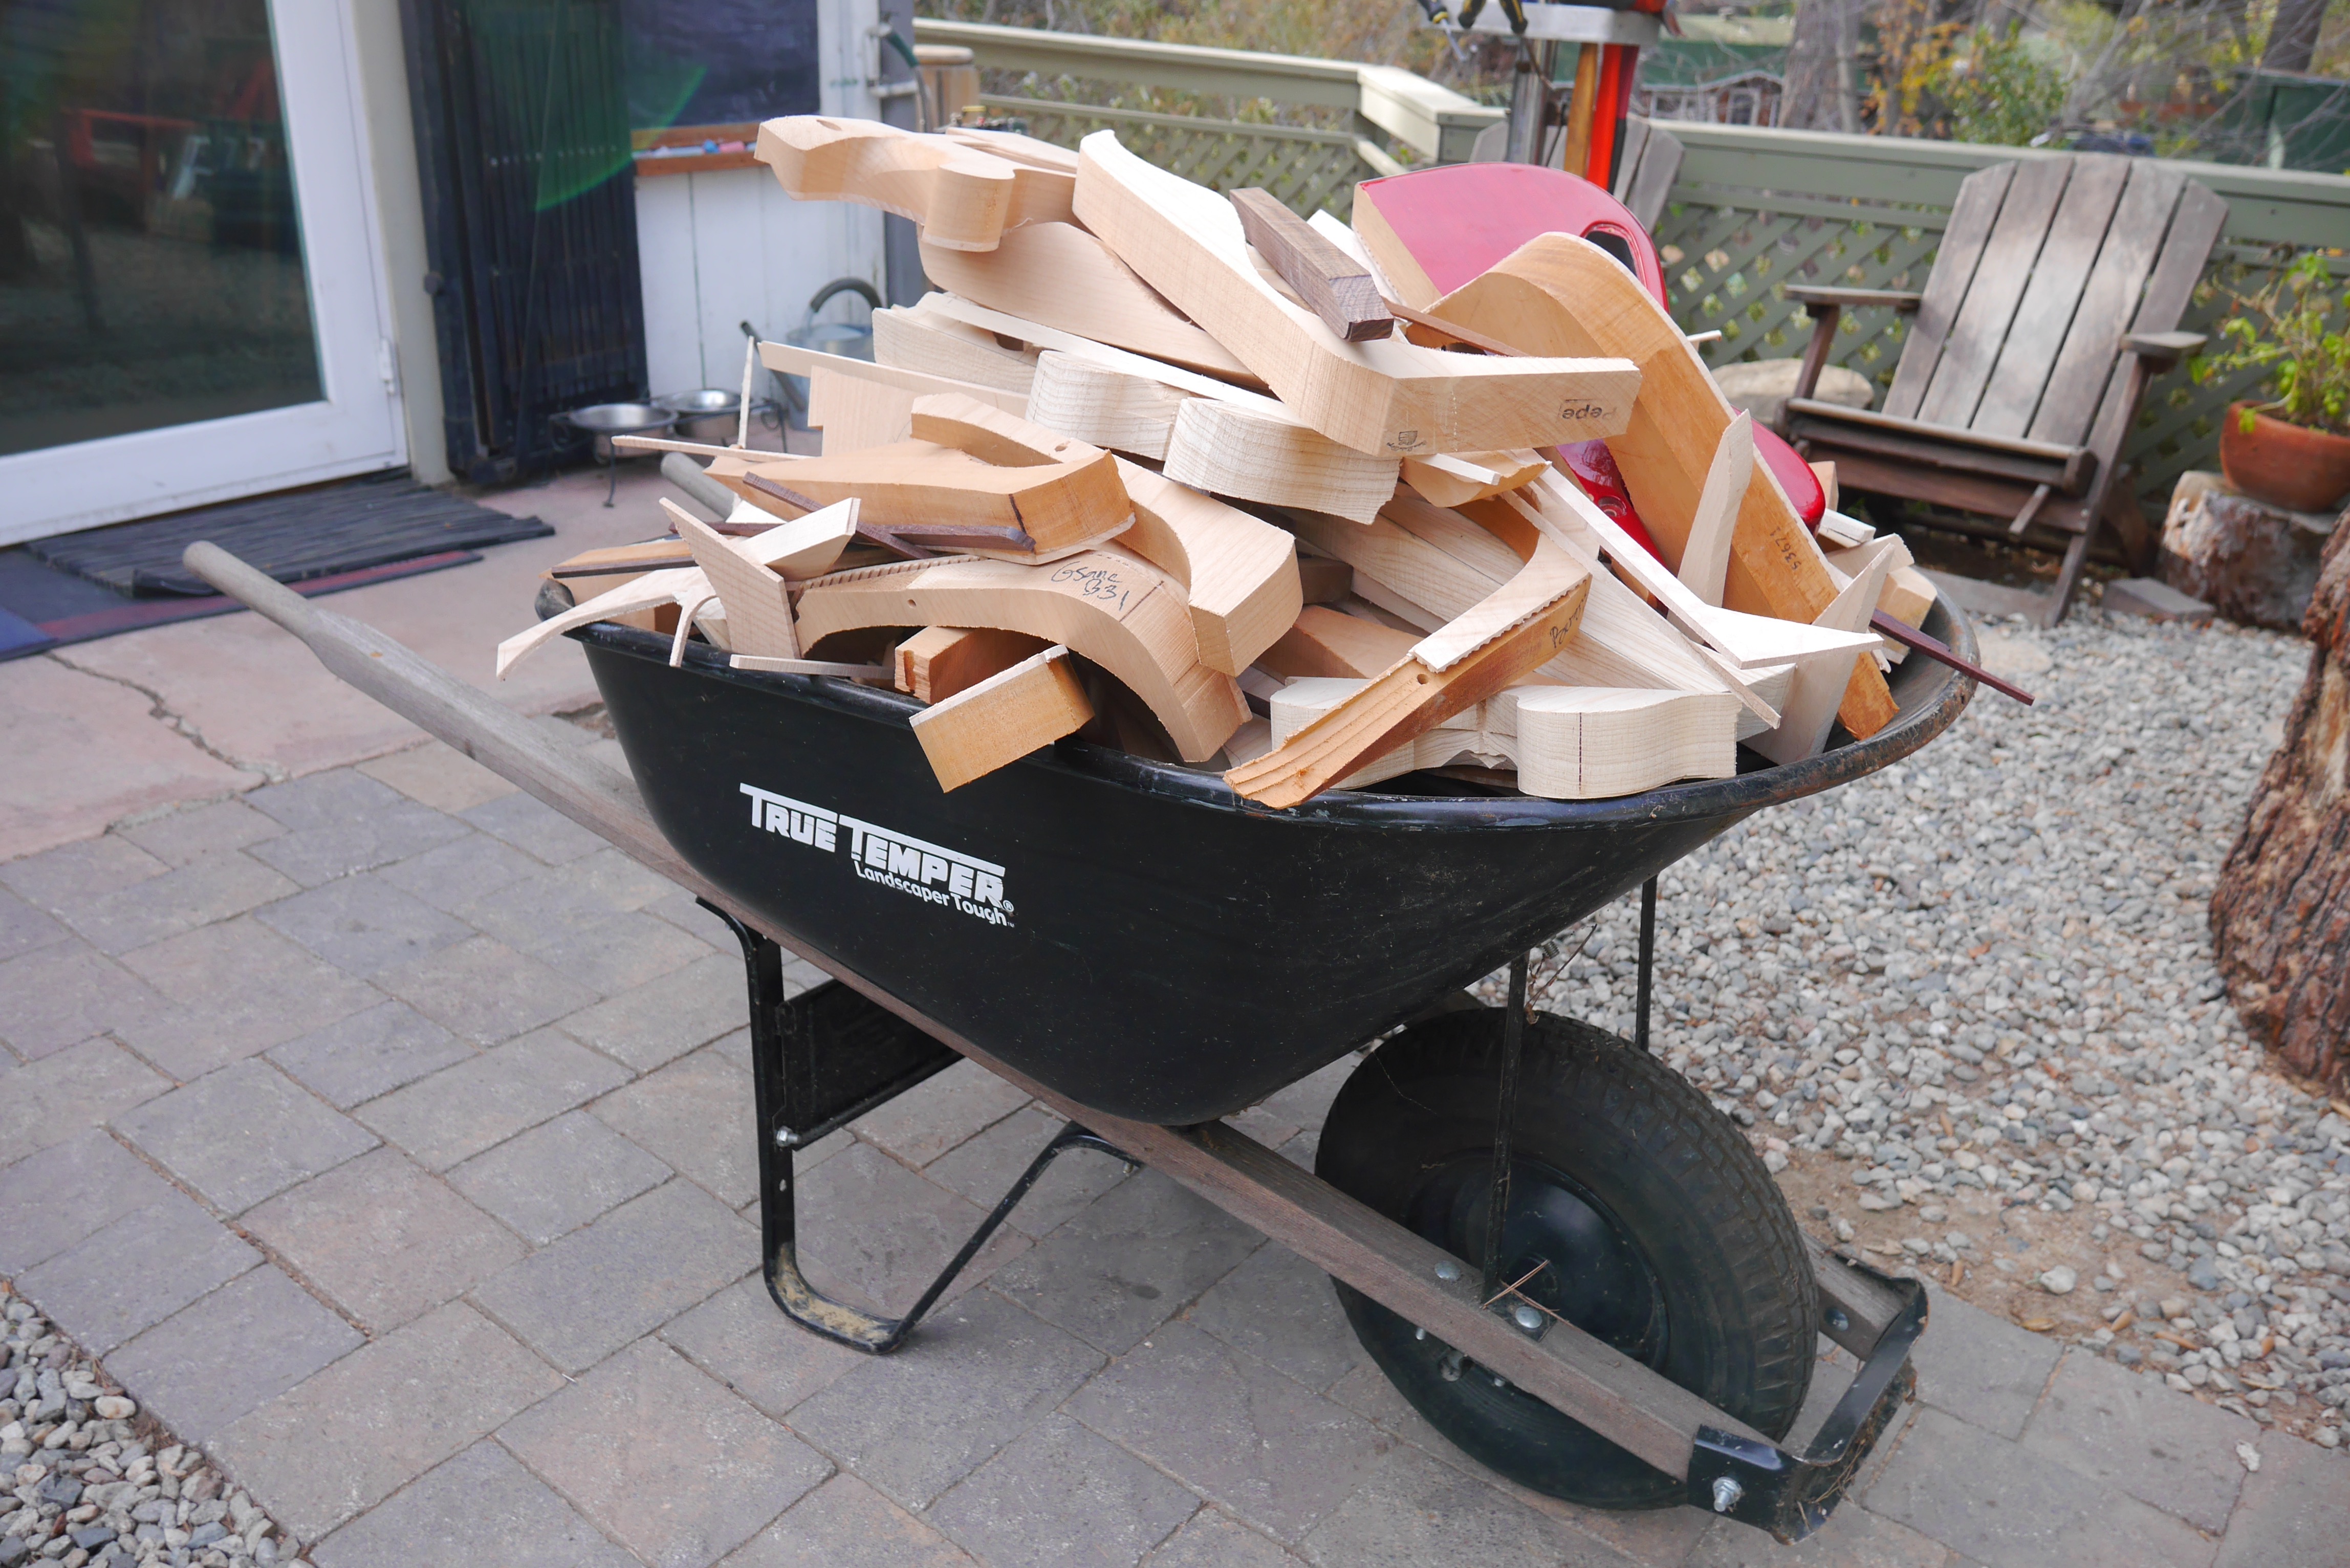 Danny has been dropping off guitar wood scraps and we have been recycling the wood.